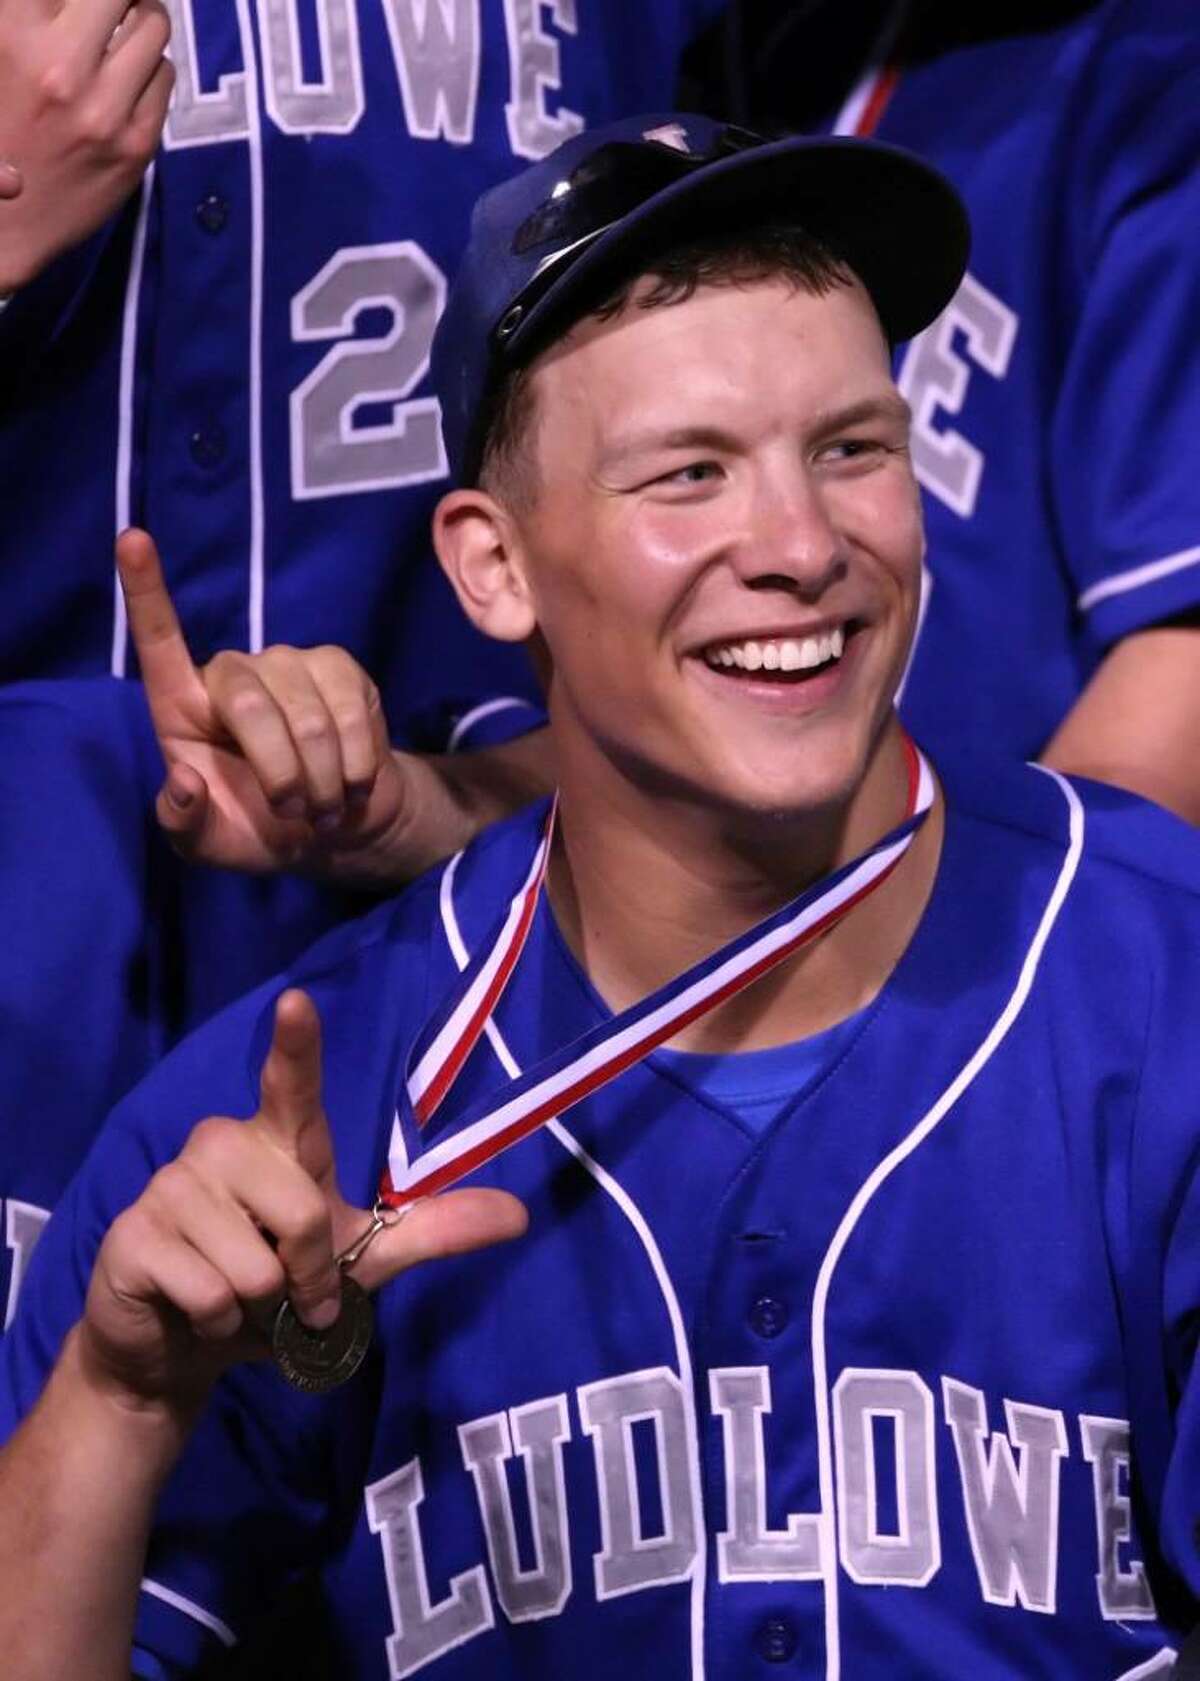 Fairfield Ludlowe's Tom Nagy celebrates winning the FCIAC championship this year. Nagy batted .388 in 2010 and drove in a school record 33 runs.